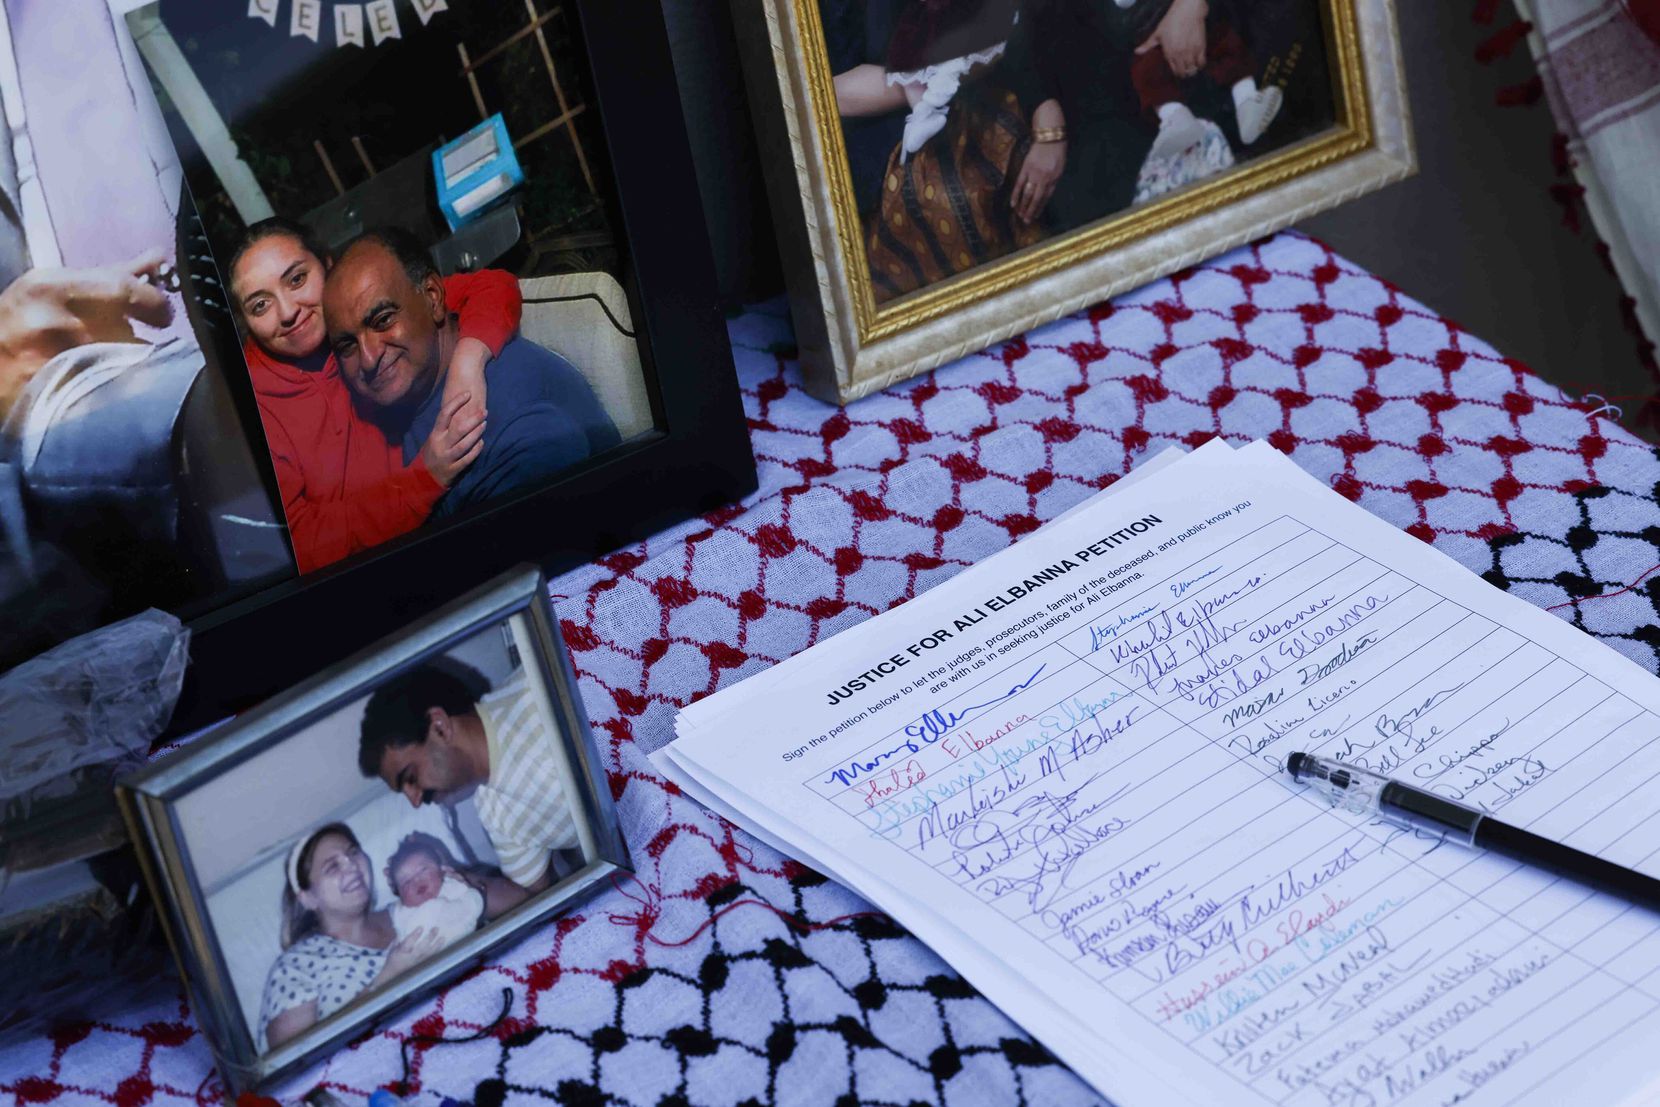 A signed petition sits on a table alongside photos of Ali Elbanna.